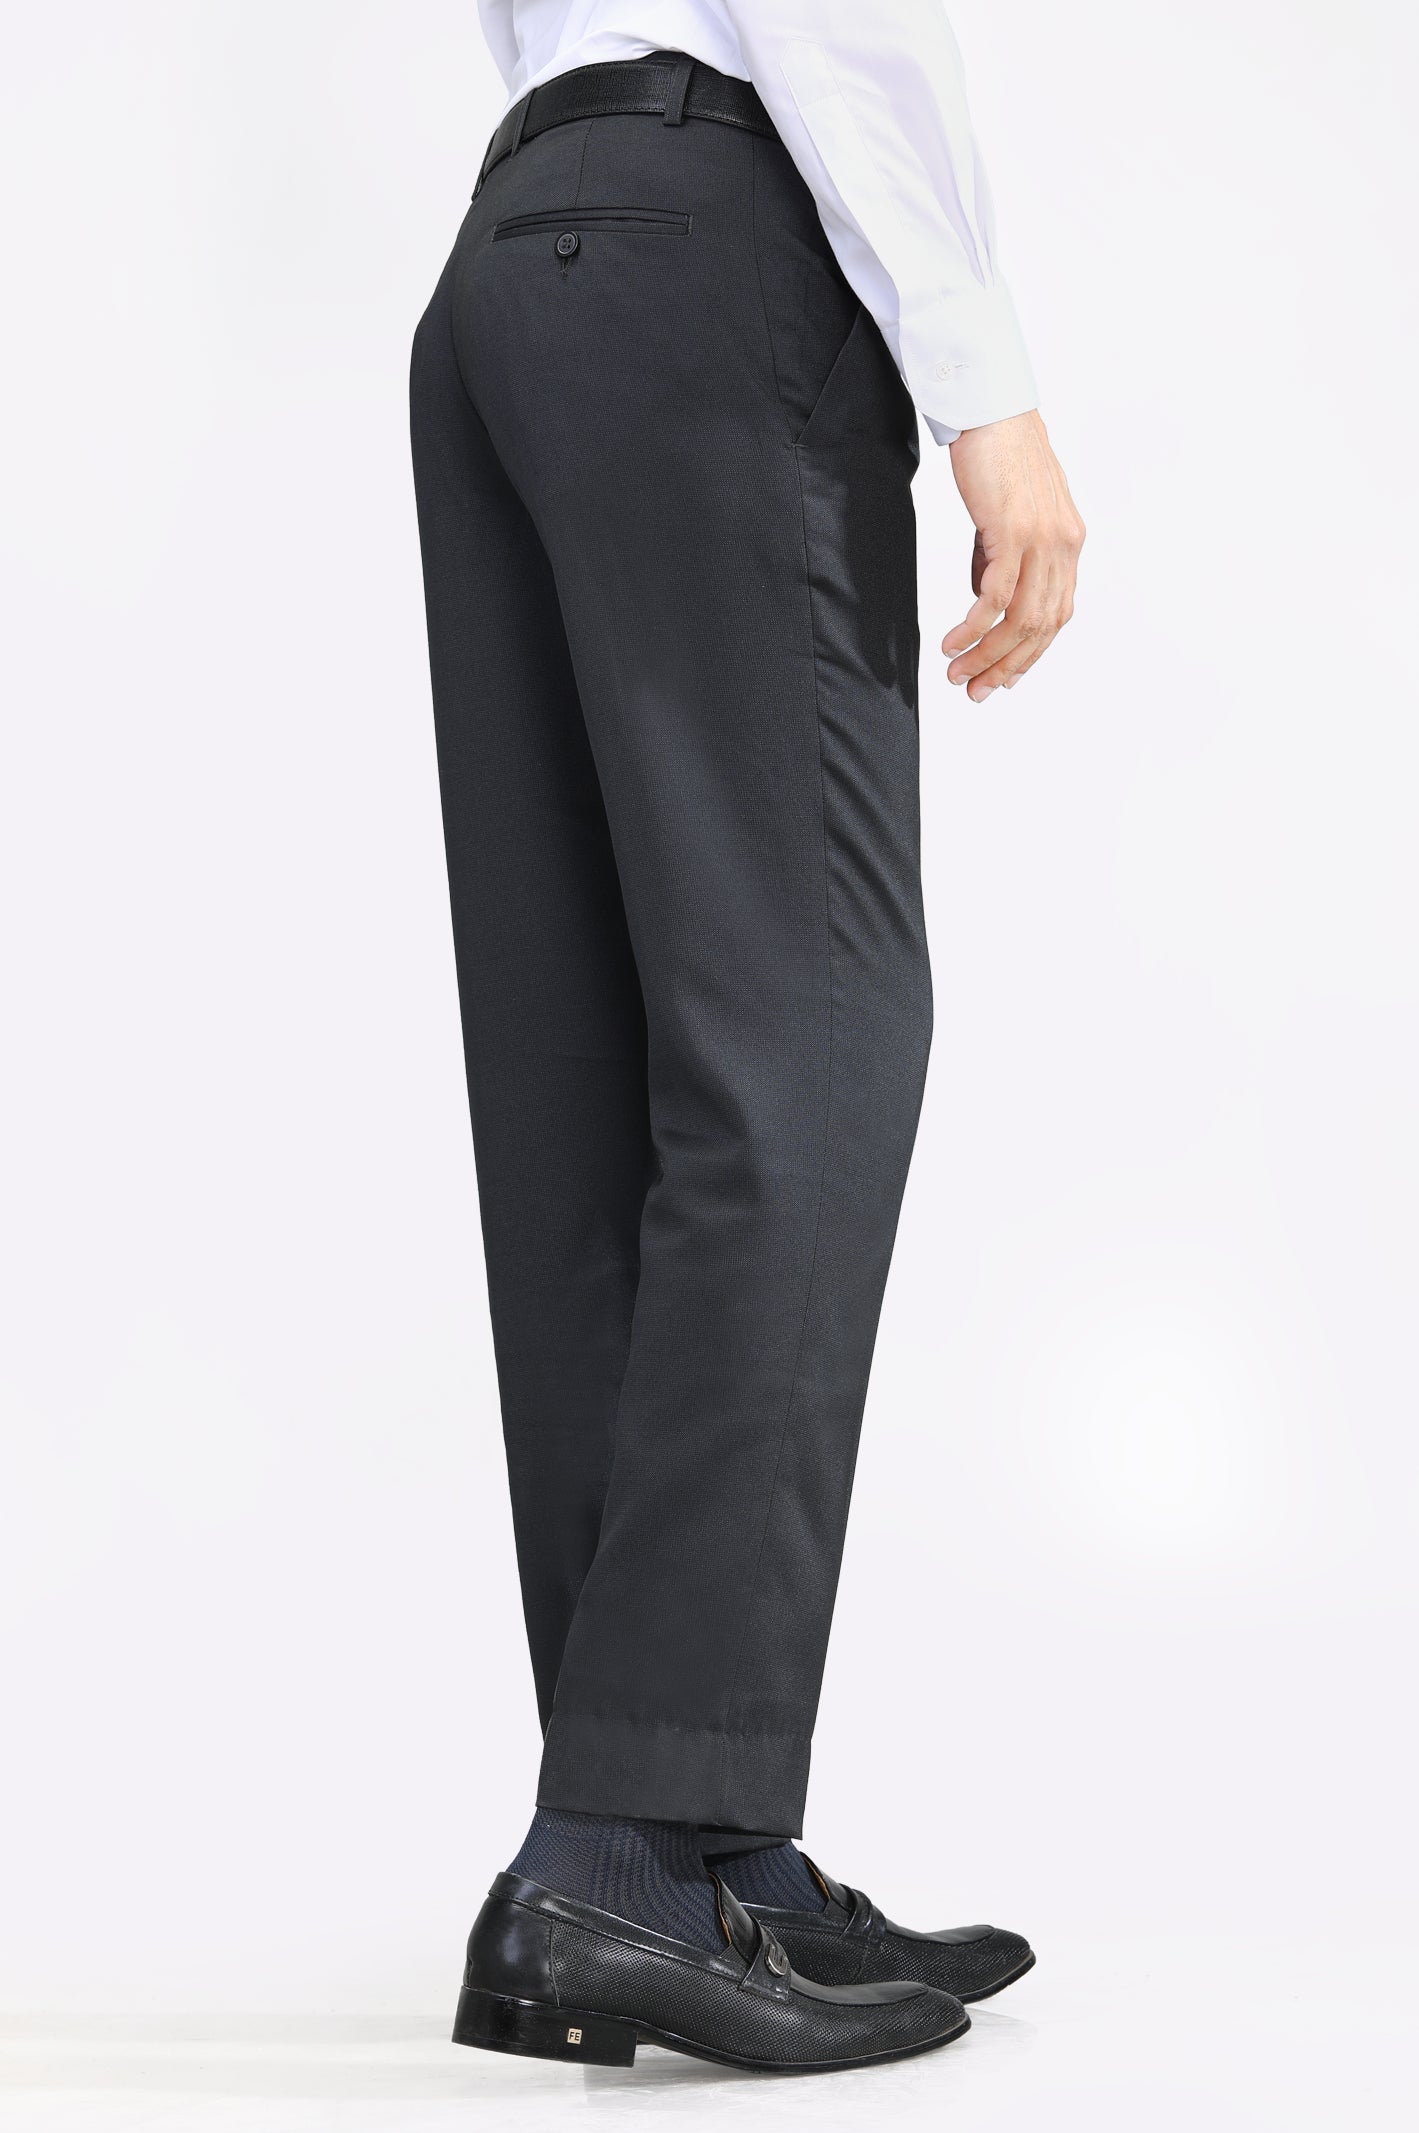 Luxury Smart Formal Trouser From Diners